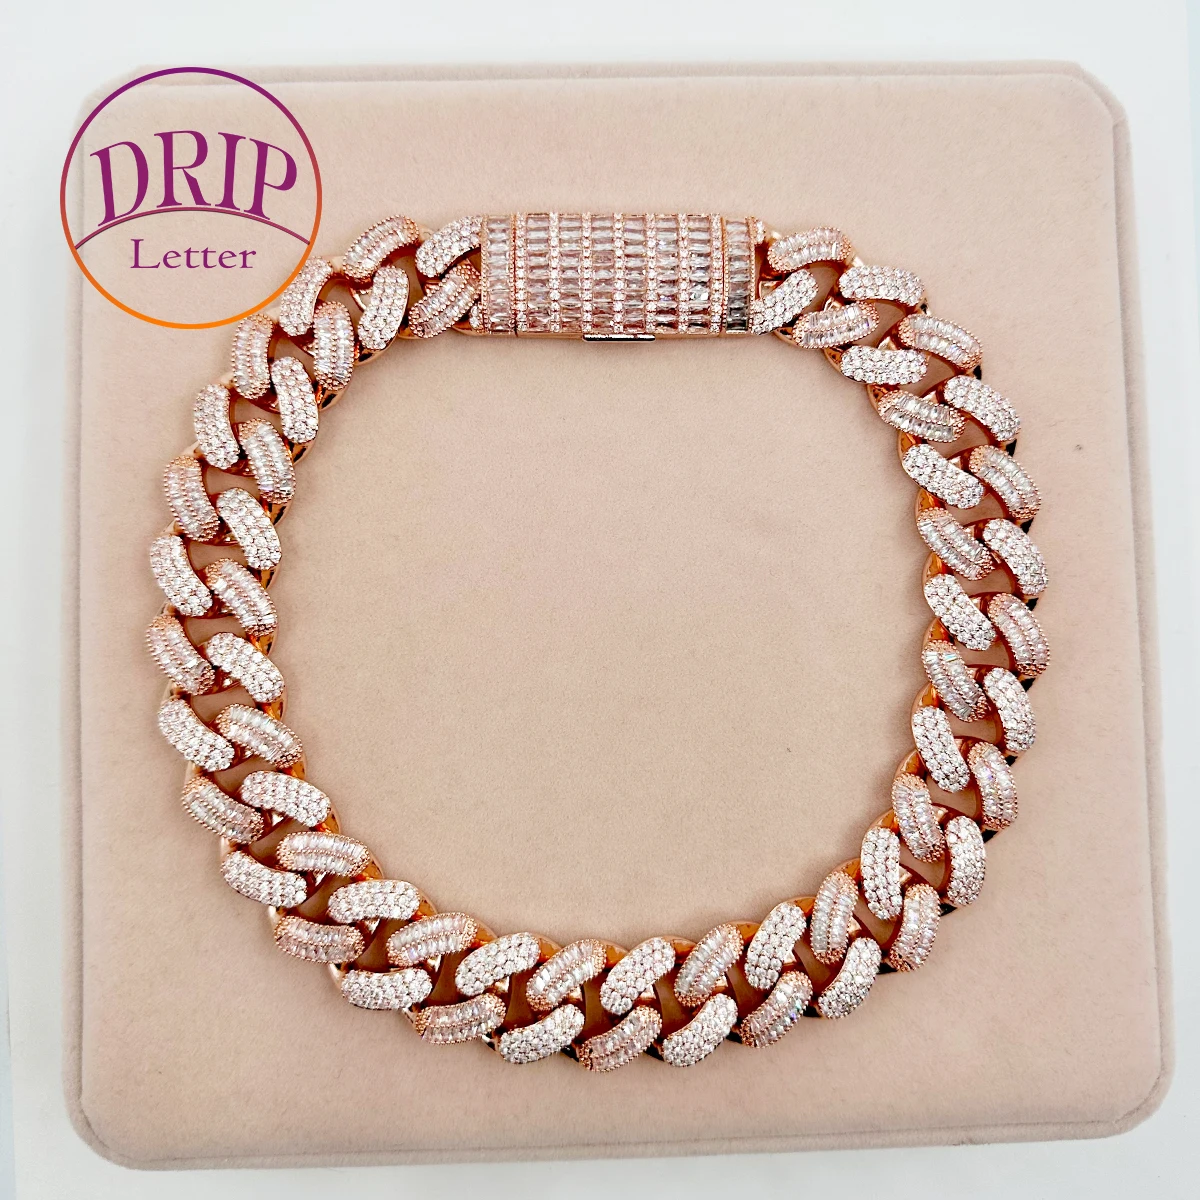 

Drip Letter Baguette Choker Necklace for Women 20mm Cuban Link Chain Iced Out Bling Charms Hip Hop Jewelry